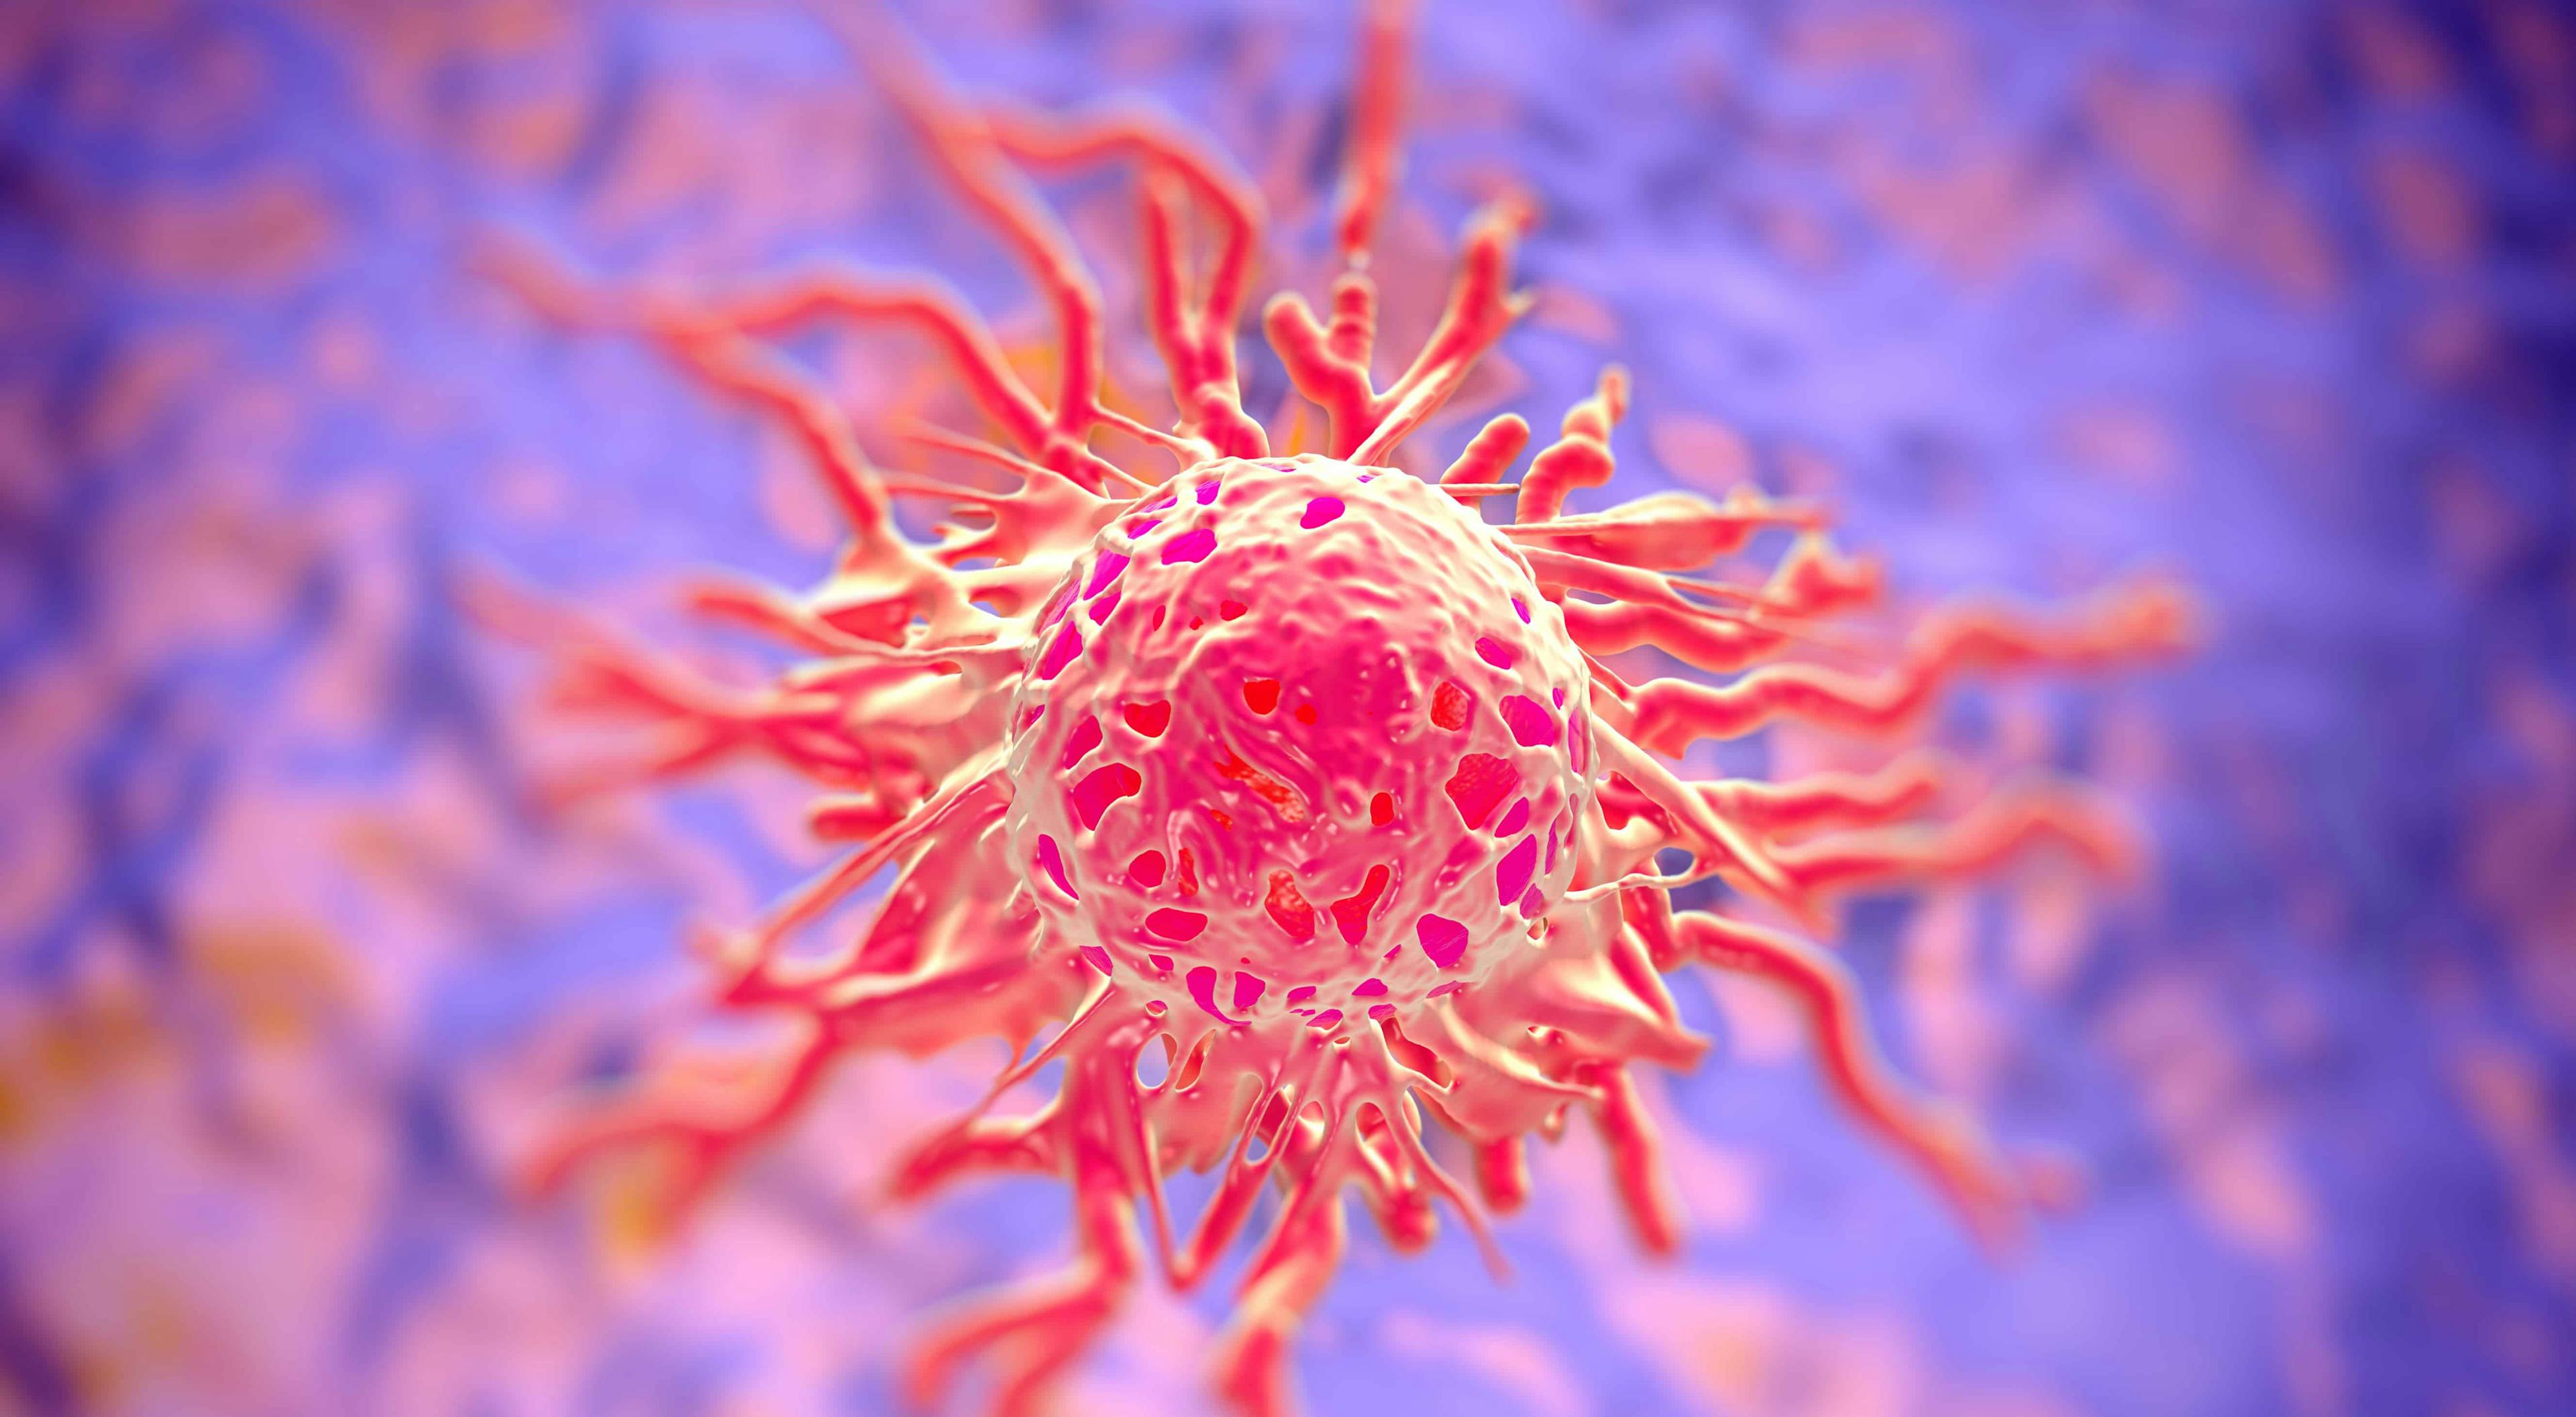 Sacituzumab Govitecan Outperforms Chemotherapy in HR+/HER2- Metastatic Breast Cancer